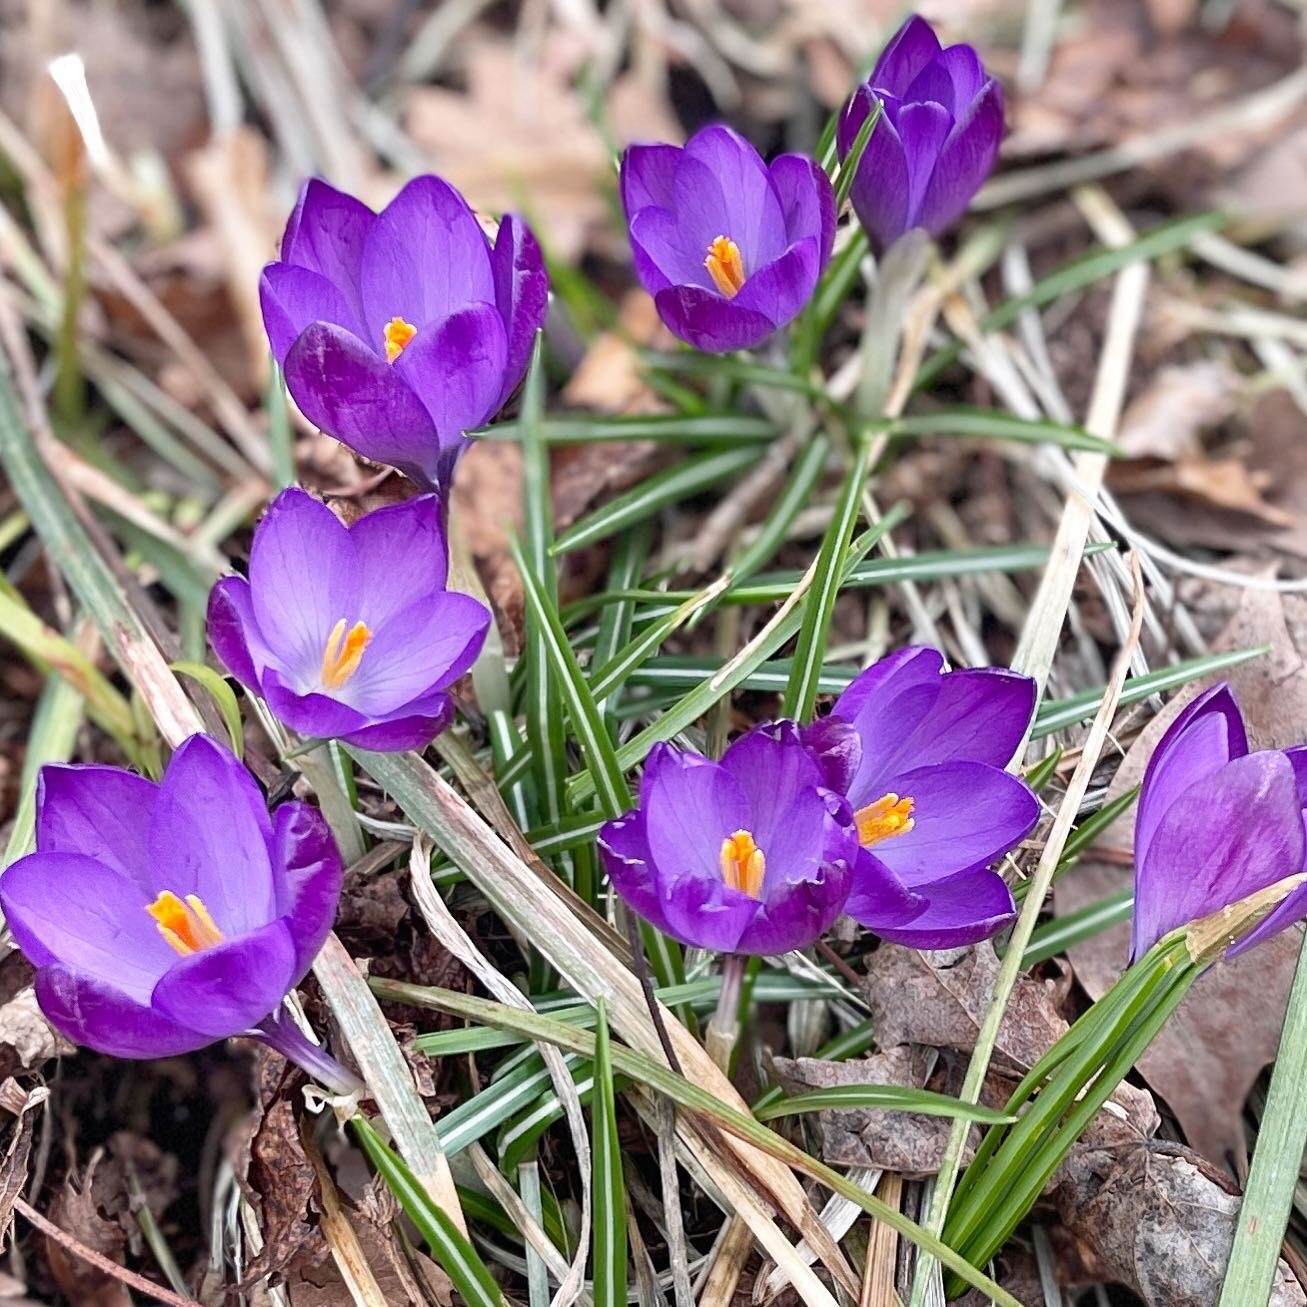 While it&rsquo;s only March early signs of spring in Riverside Park this morning #springflowers